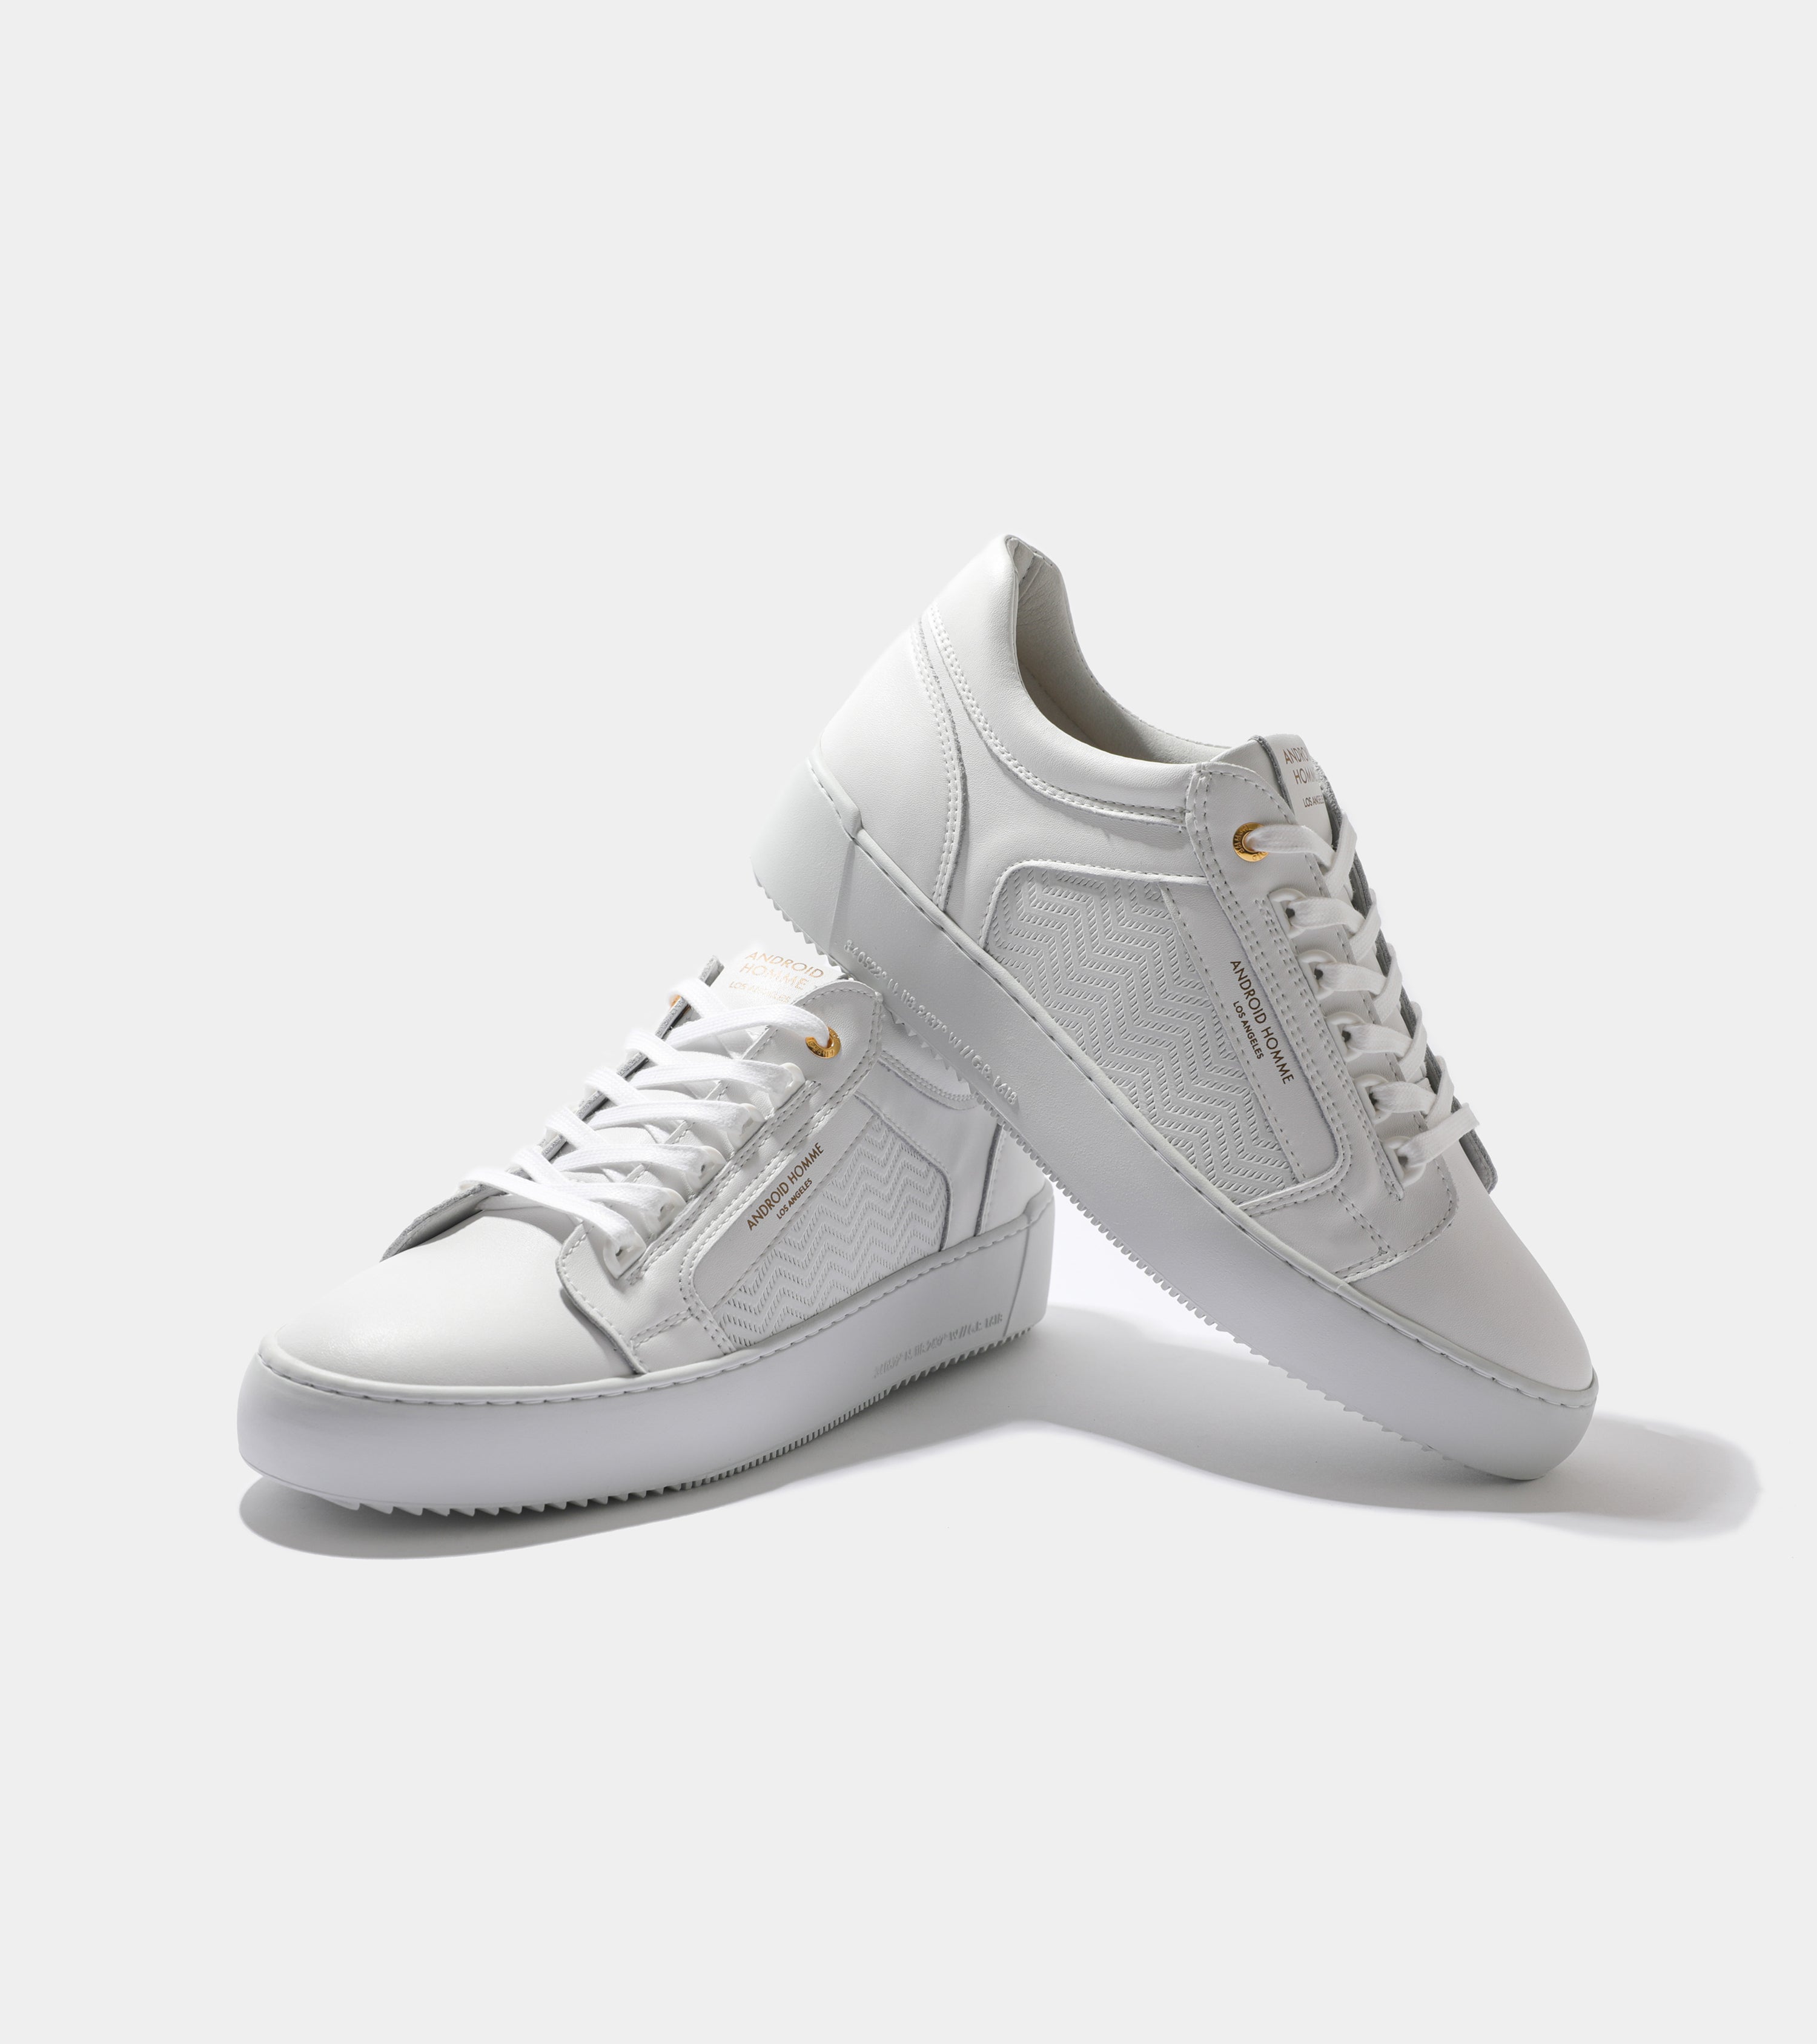 Ecom imagery of the Venice White Emboss Leather Android Homme Trainers.